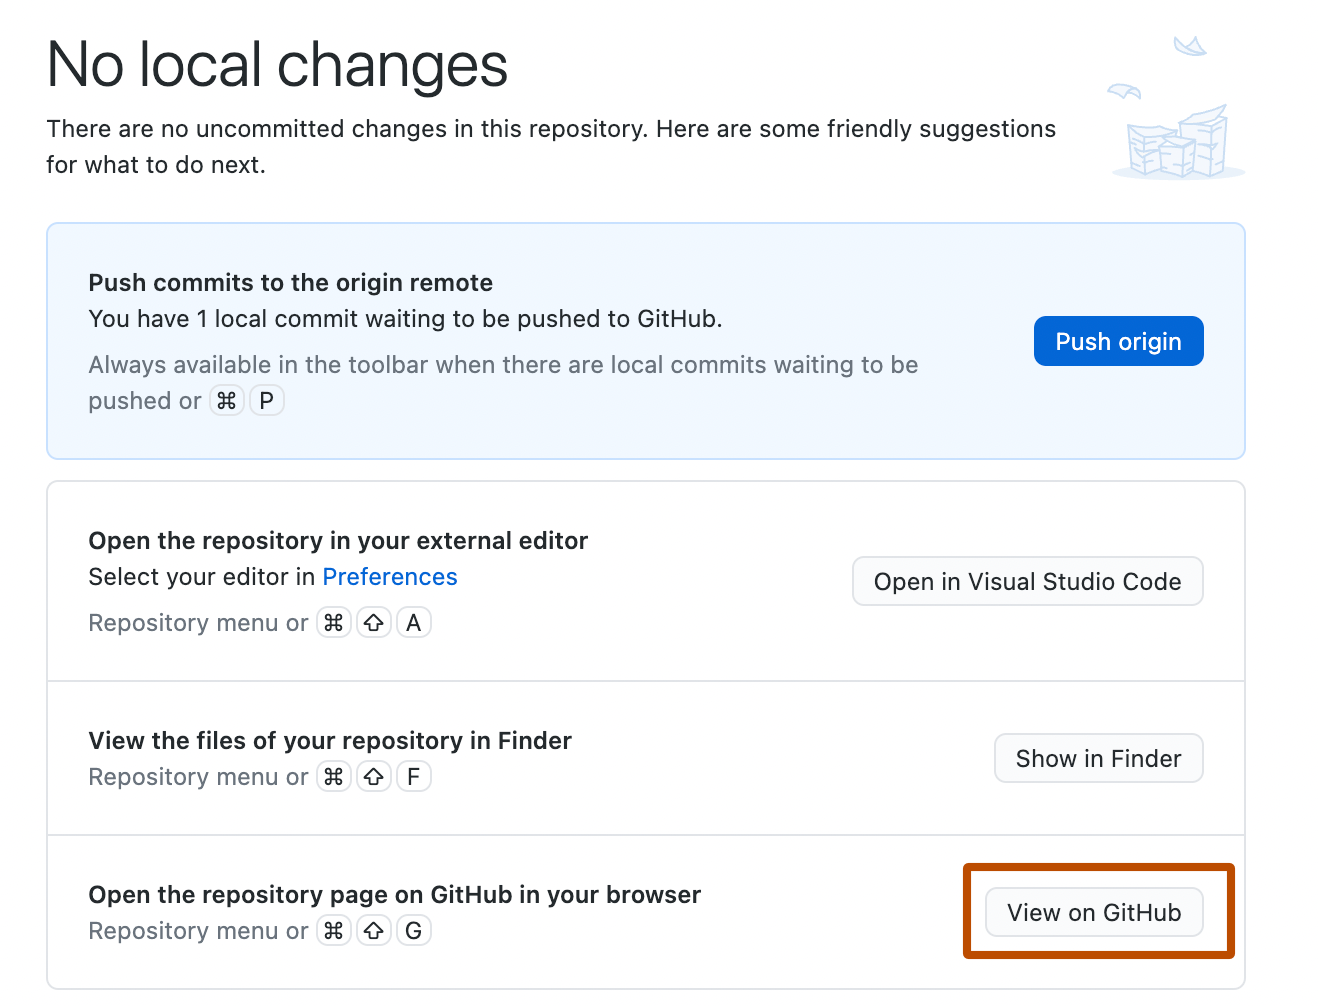 Screenshot of the "No local changes" screen. In a list of suggestions, a button, labeled "View on GitHub", is highlighted with an orange outline.